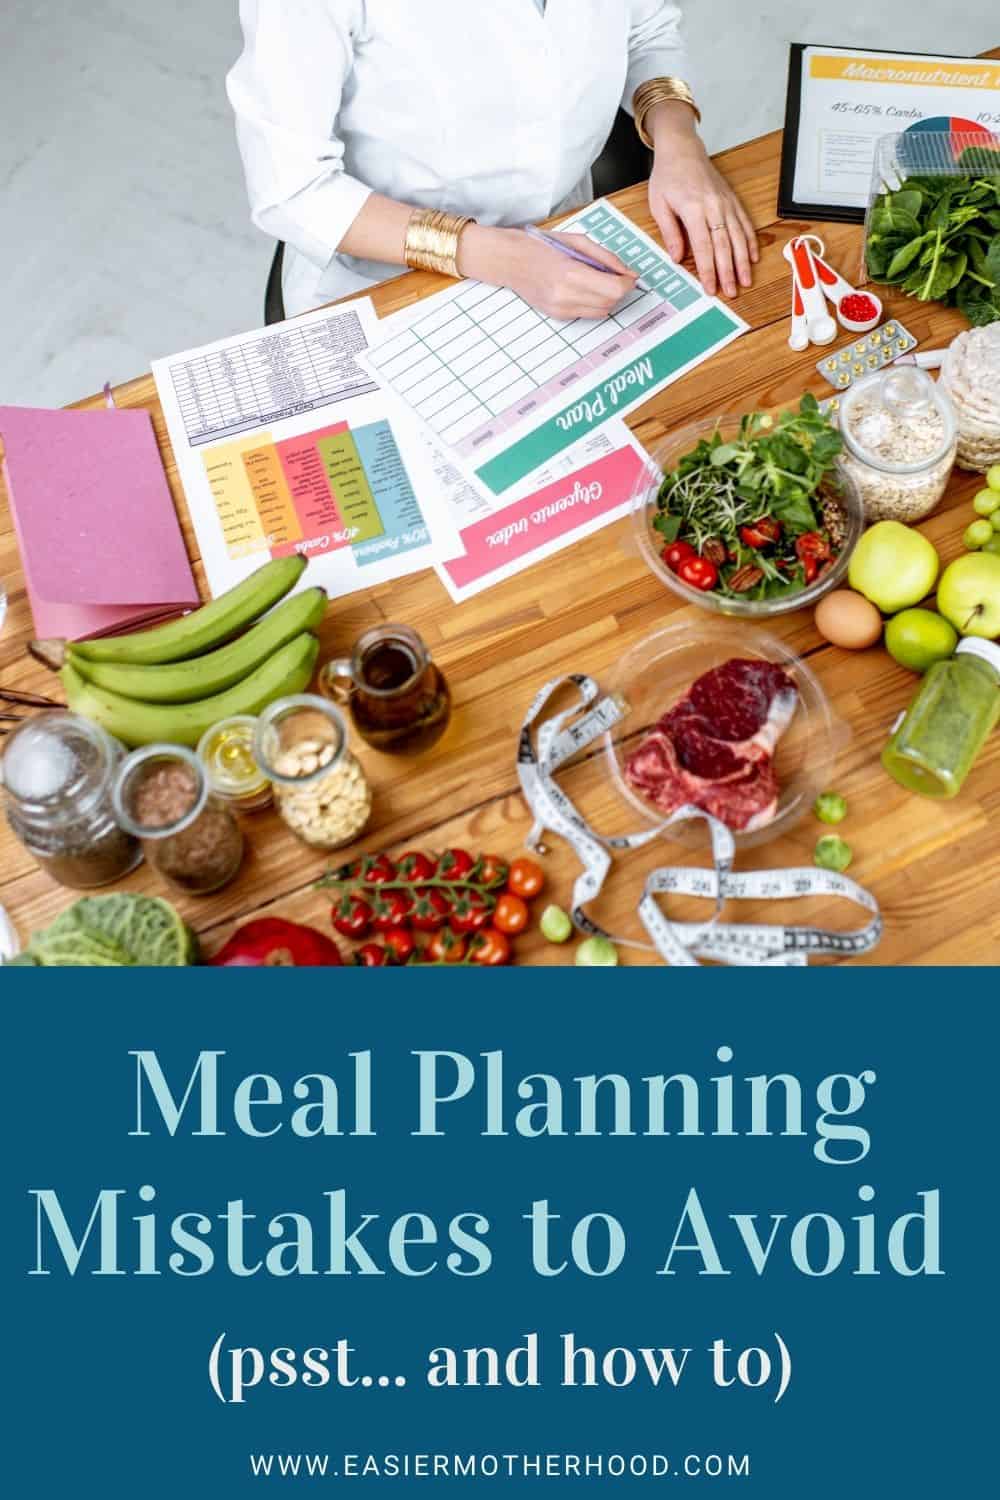 Woman sitting at a table with paper, pen, and food. Below image text reads "meal planning mistakes to avoid (psst... and how to) www.easiermotherhood.com"